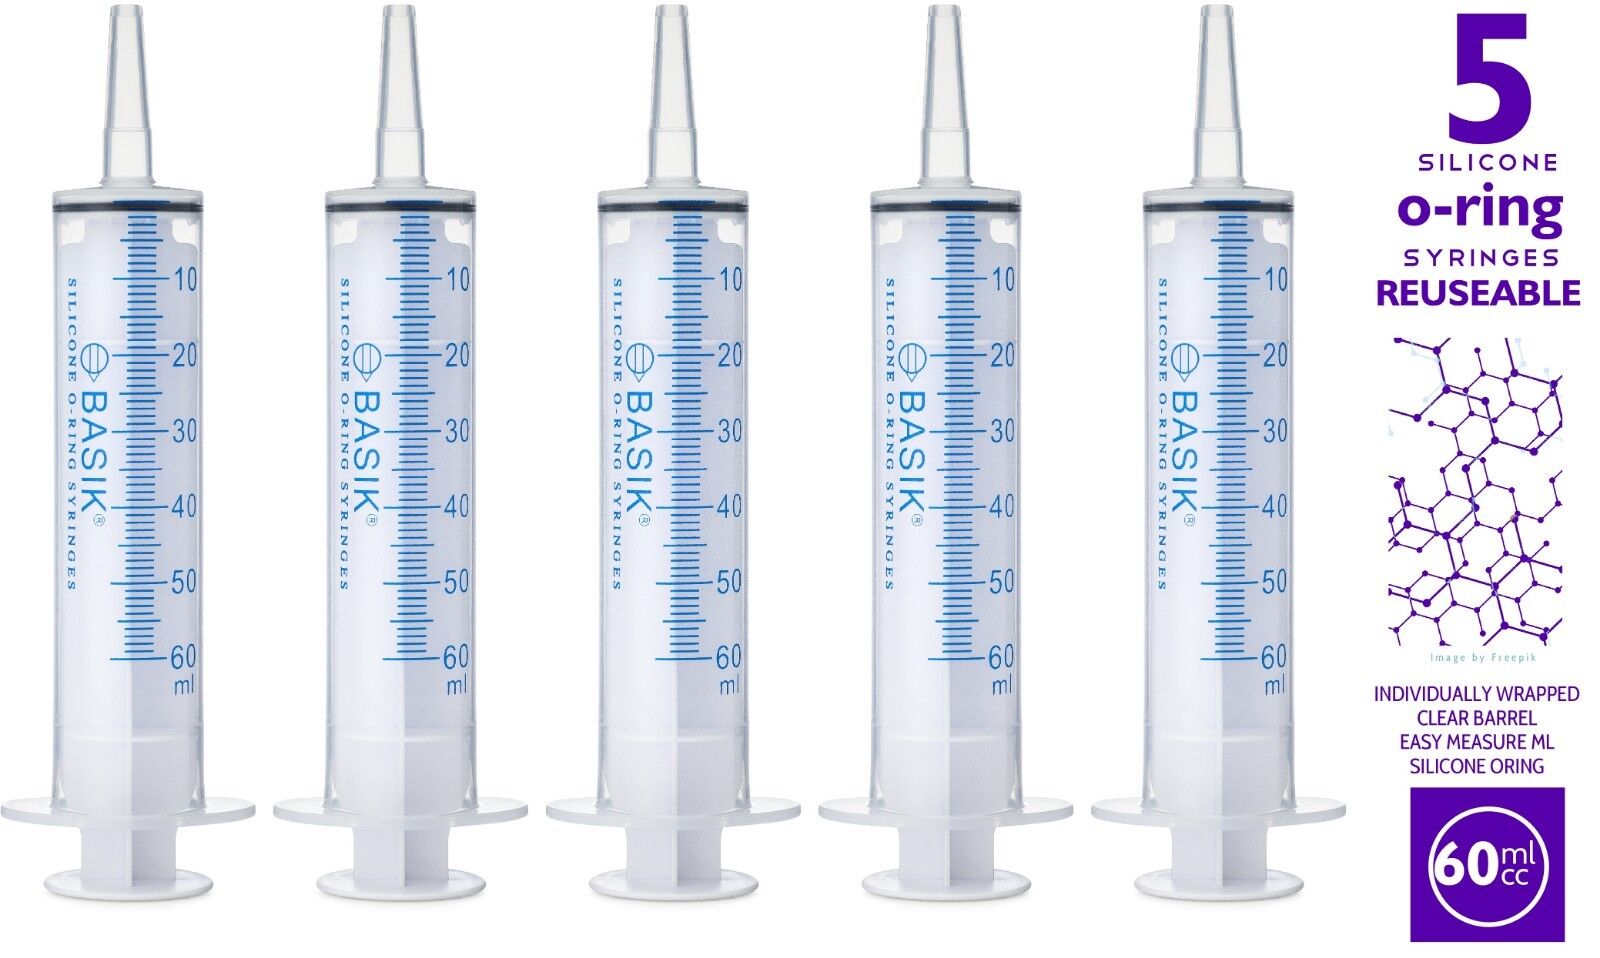 60cc | 60ml  Enteral Feeding Reusable Syringe Silicone O-ring Catheter Tip 5/pak Medcare Products